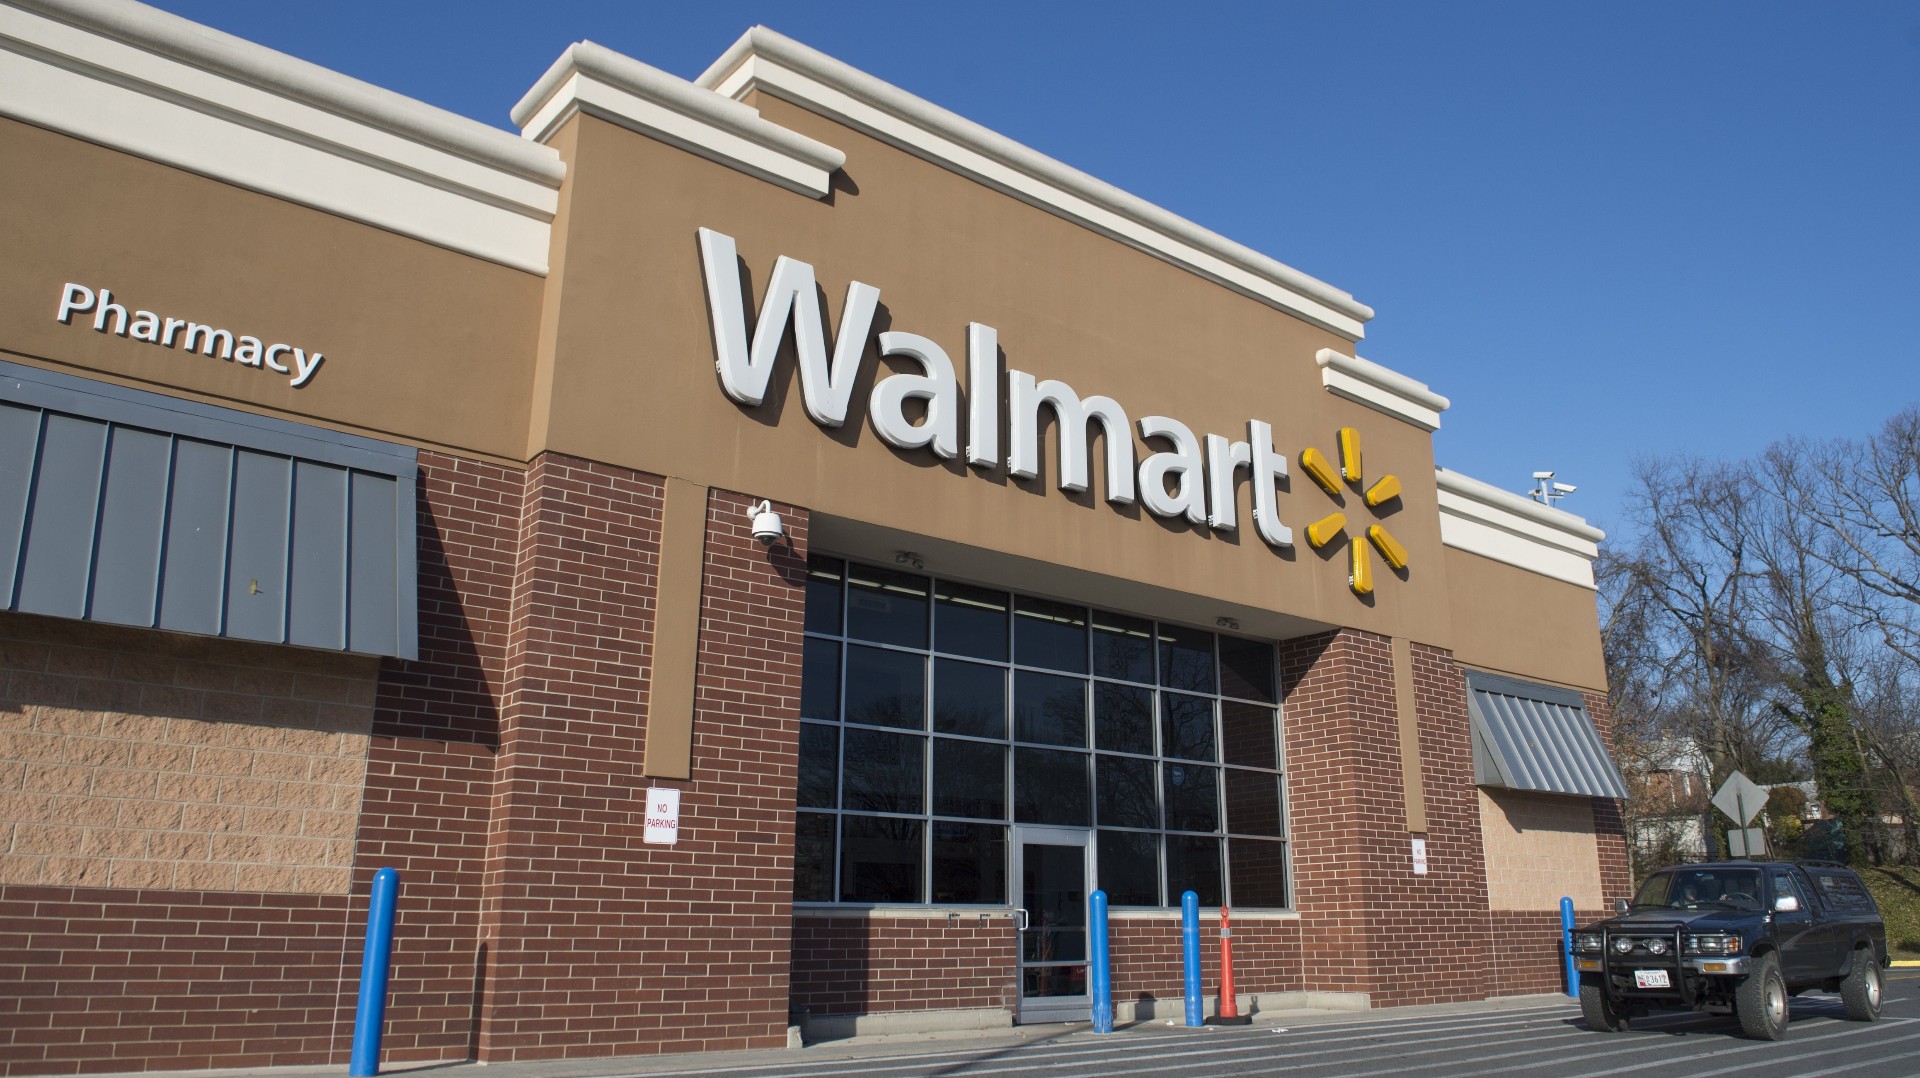 Walmart to offer discounts for ordering at home, picking up at store - WCNC